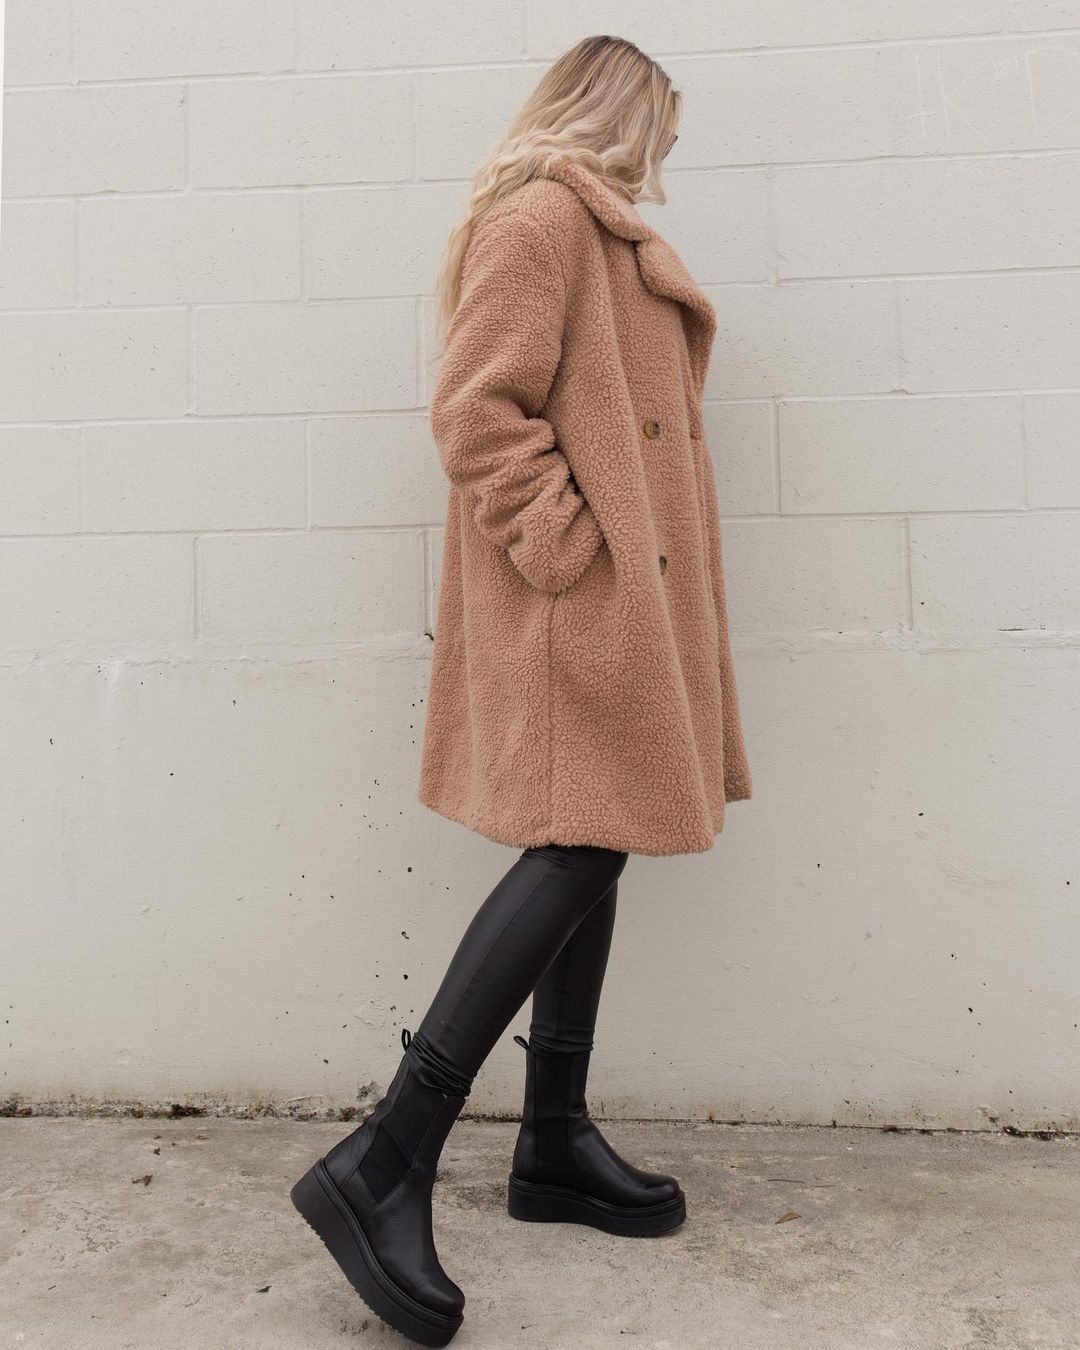 Teddy Coats are Still a Favorite Trend This Fall and Winter